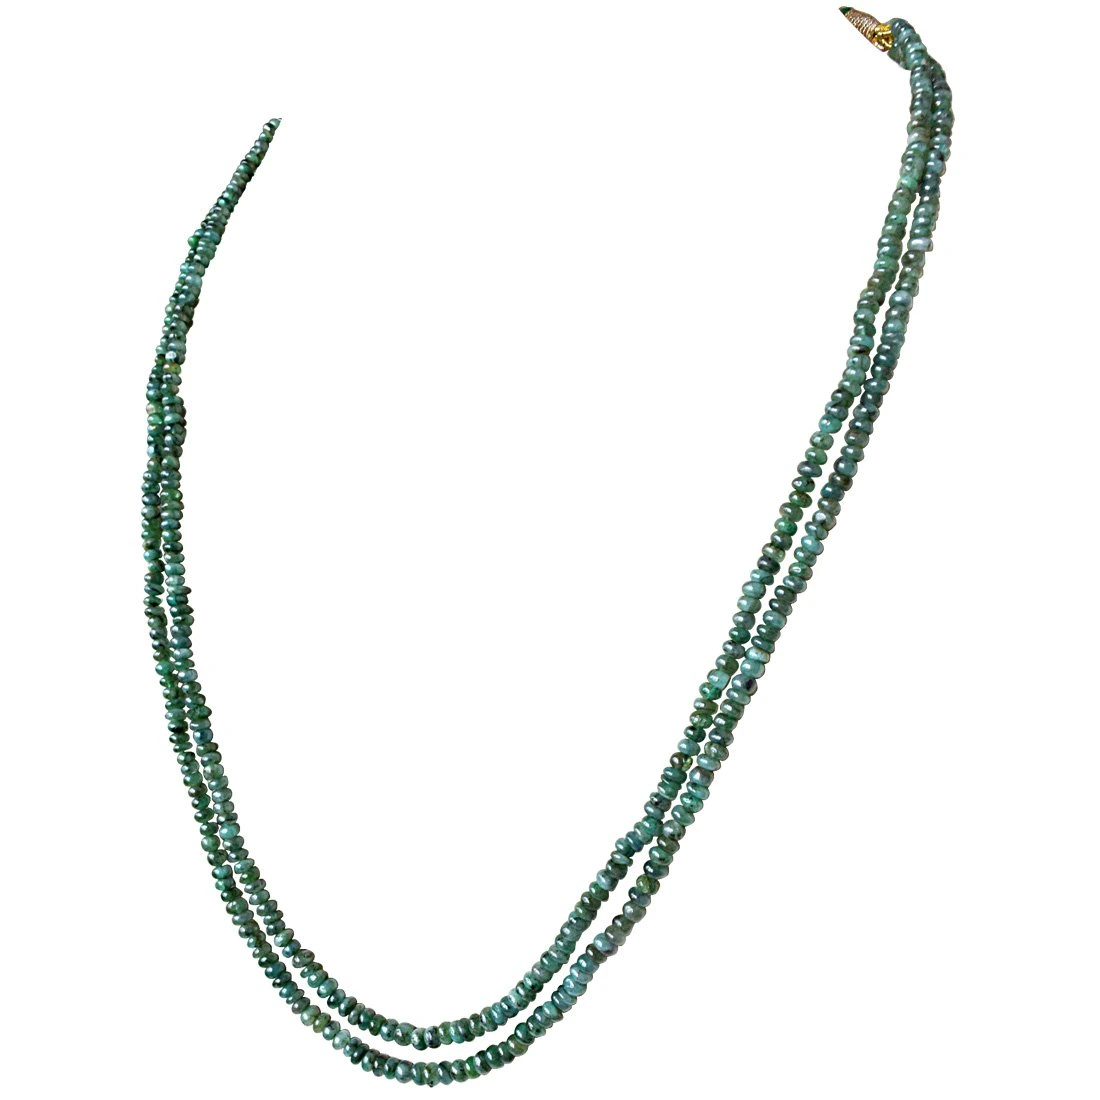 2 Line 110cts Real Natural Green Emerald Beads Necklace for Women (110cts EMR Neck)